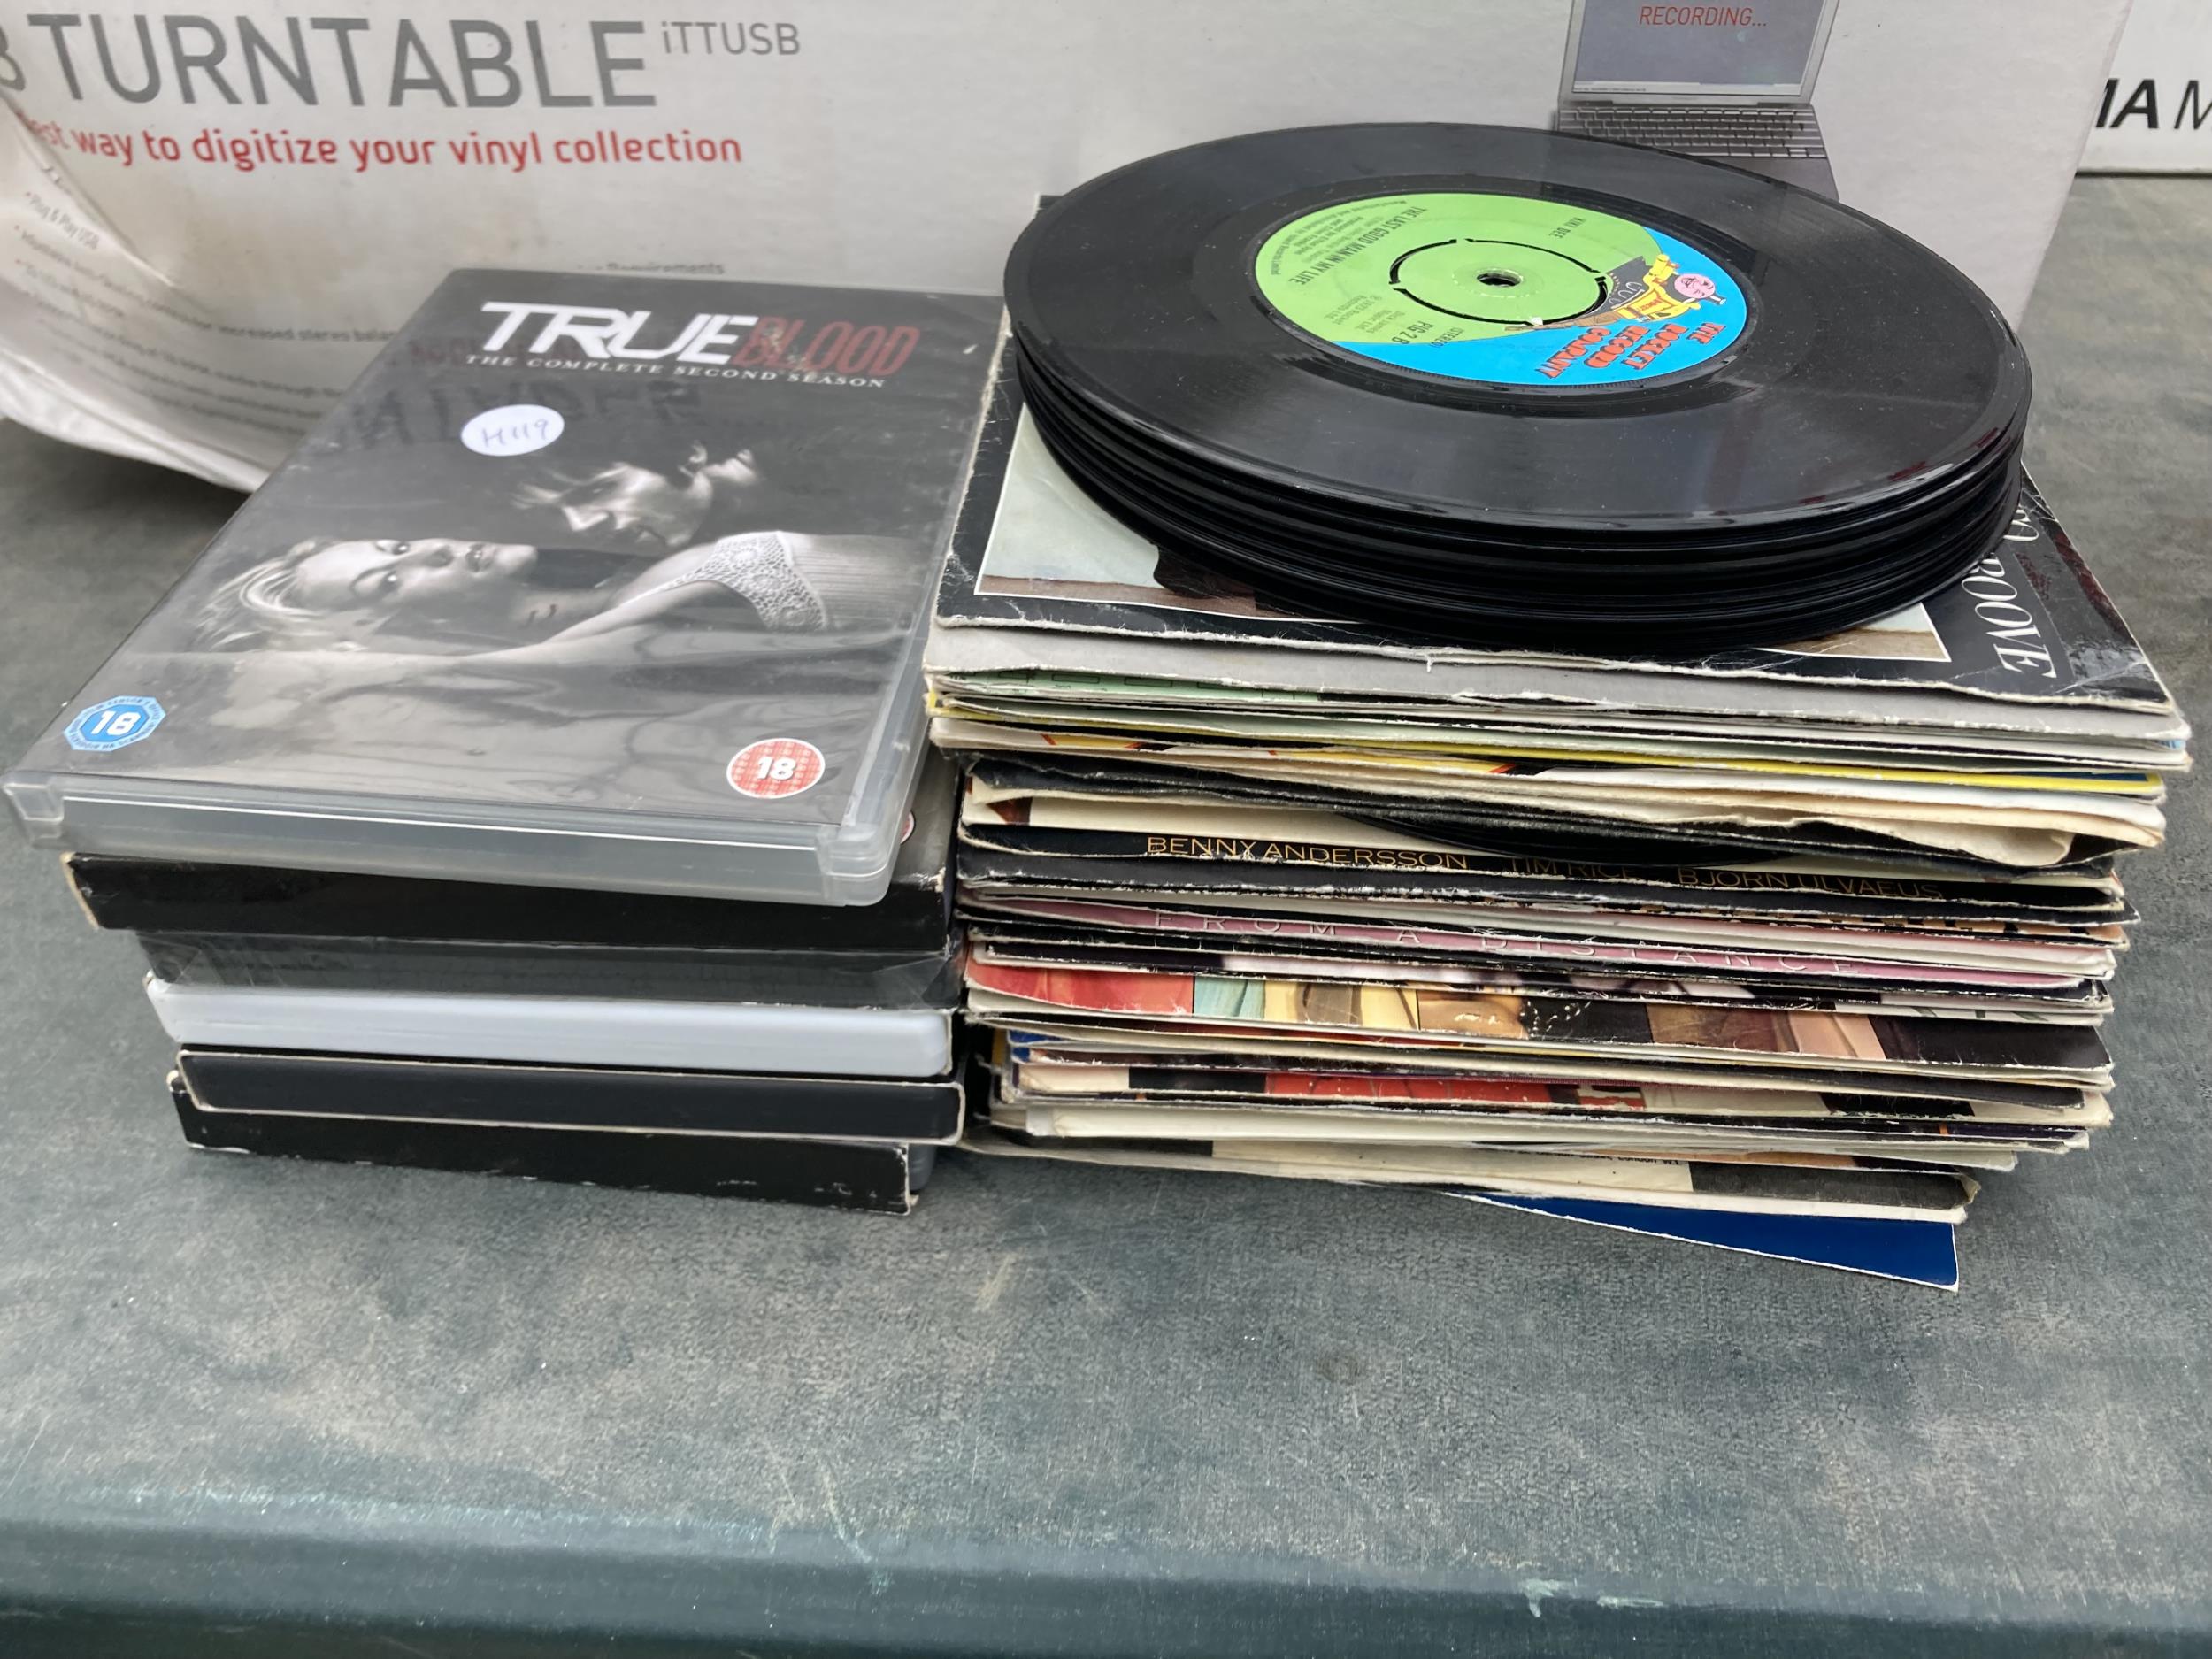 AN ION USB TURNTABLE AND AN ASSORTMENT OF 7" SINGLES - Image 3 of 4